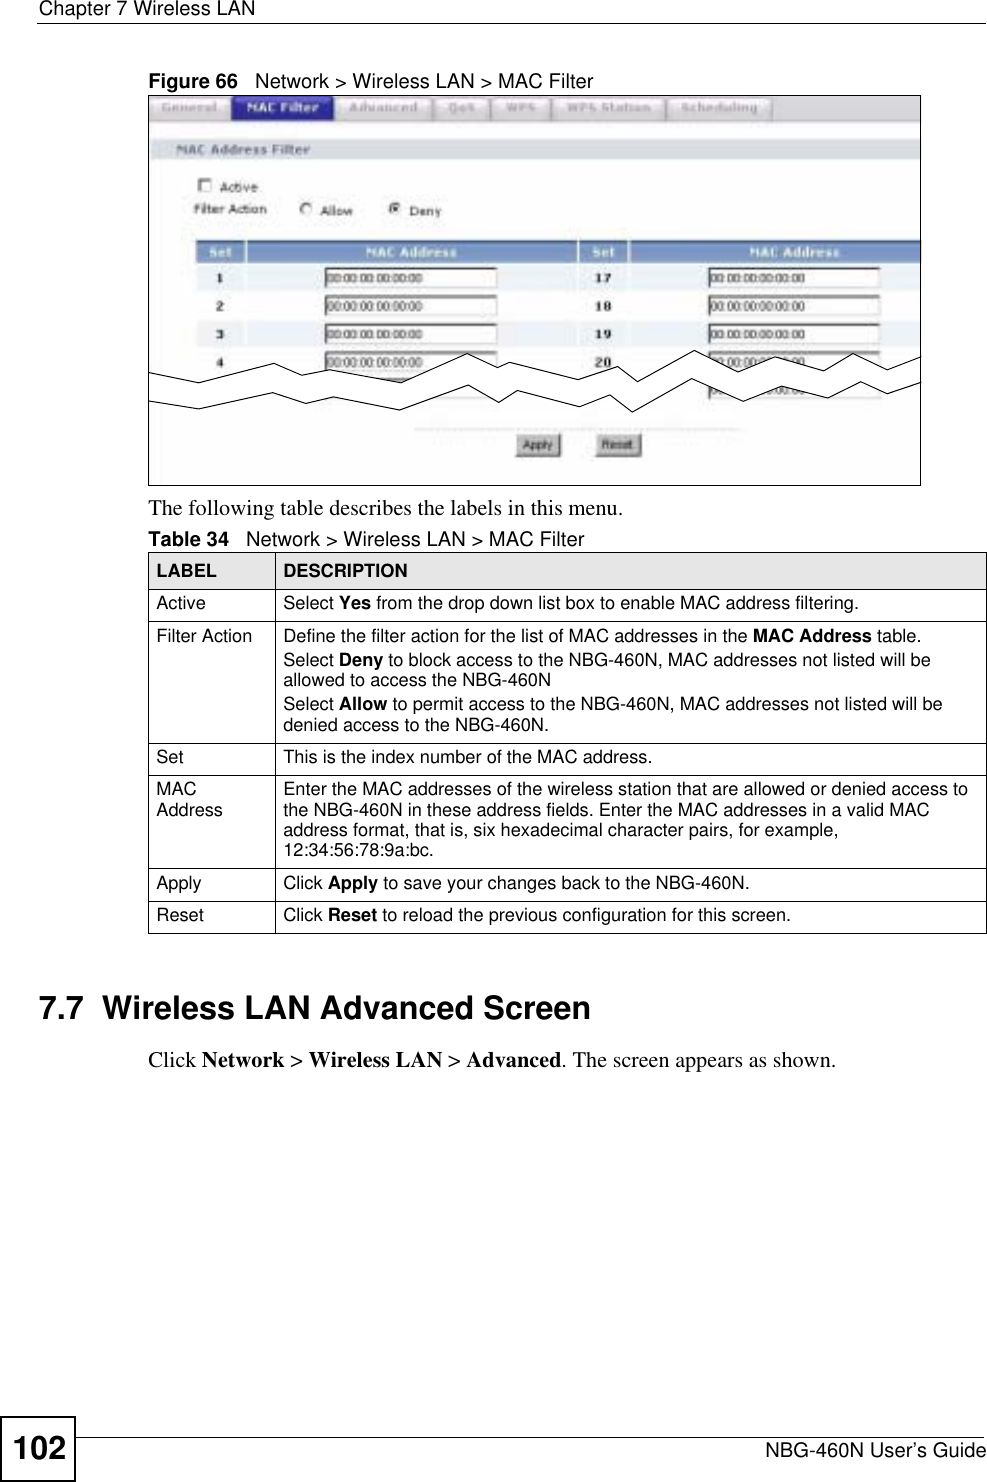 Chapter 7 Wireless LANNBG-460N User’s Guide102Figure 66   Network &gt; Wireless LAN &gt; MAC FilterThe following table describes the labels in this menu.7.7  Wireless LAN Advanced ScreenClick Network &gt; Wireless LAN &gt; Advanced. The screen appears as shown.Table 34   Network &gt; Wireless LAN &gt; MAC FilterLABEL DESCRIPTIONActive Select Yes from the drop down list box to enable MAC address filtering.Filter Action  Define the filter action for the list of MAC addresses in the MAC Address table. Select Deny to block access to the NBG-460N, MAC addresses not listed will be allowed to access the NBG-460N Select Allow to permit access to the NBG-460N, MAC addresses not listed will be denied access to the NBG-460N. Set This is the index number of the MAC address.MAC Address Enter the MAC addresses of the wireless station that are allowed or denied access to the NBG-460N in these address fields. Enter the MAC addresses in a valid MAC address format, that is, six hexadecimal character pairs, for example, 12:34:56:78:9a:bc.Apply Click Apply to save your changes back to the NBG-460N.Reset Click Reset to reload the previous configuration for this screen.